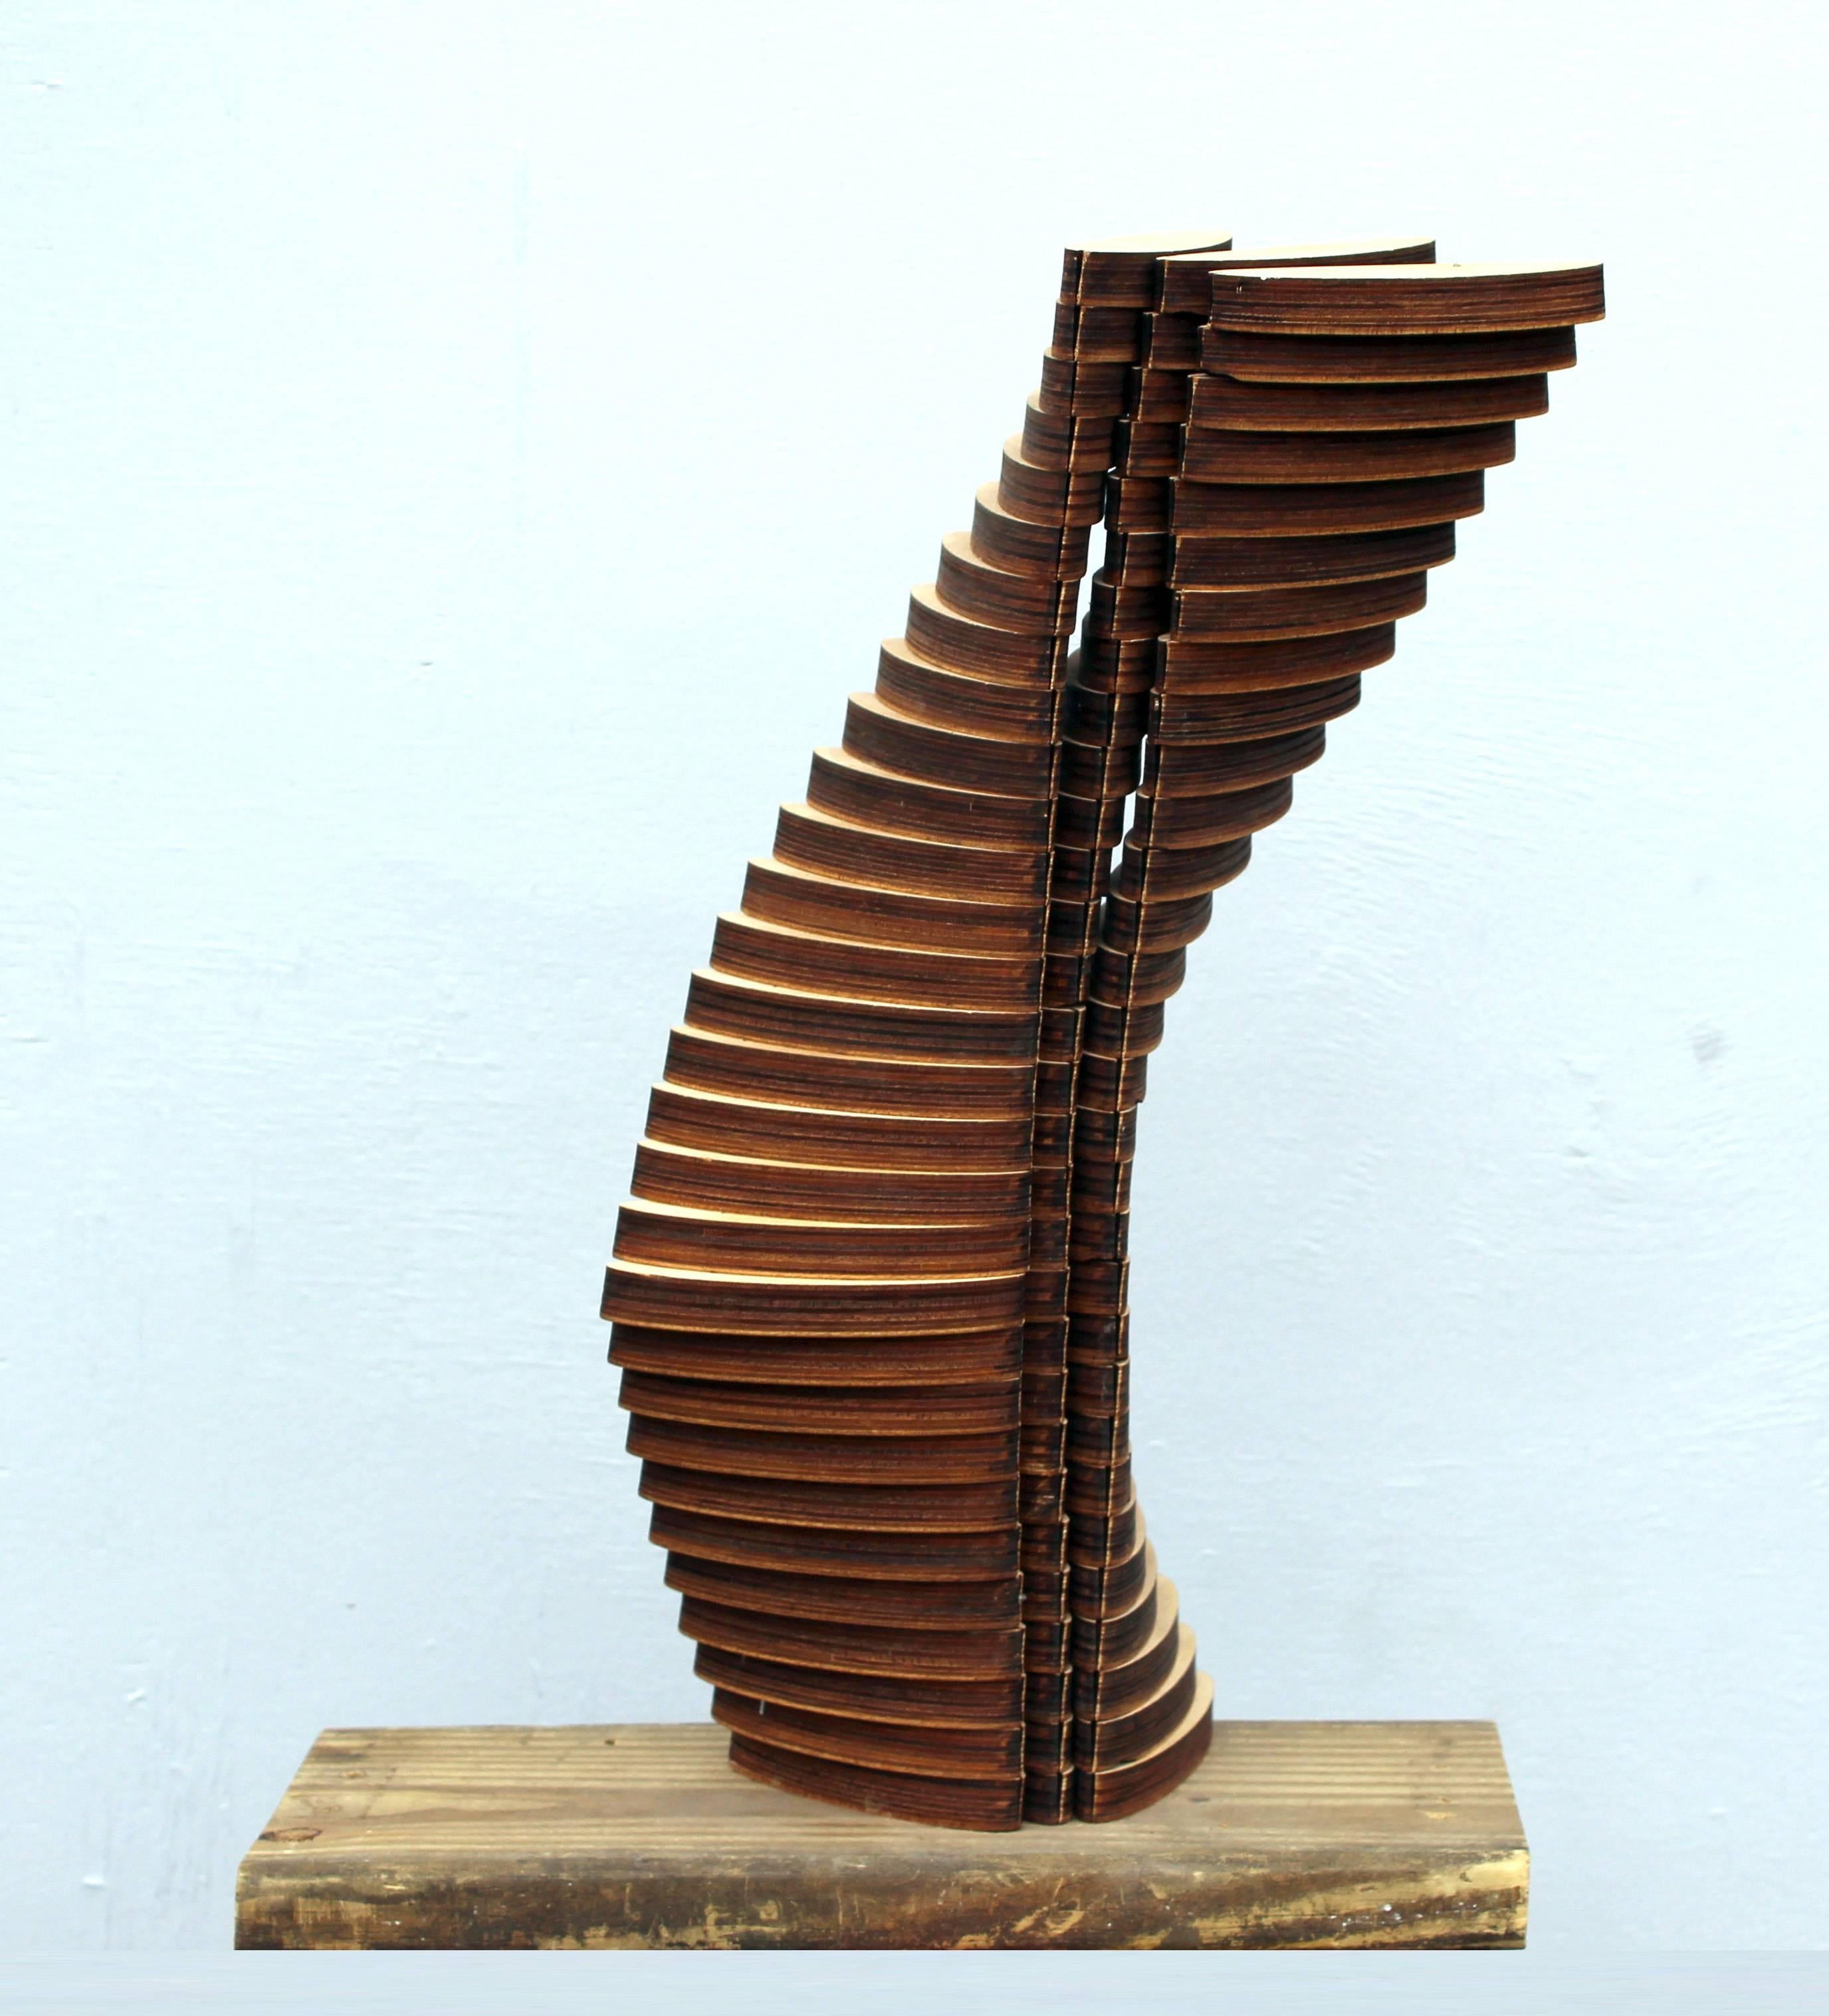 Stacked 2 - Sculpture by Scott Bye